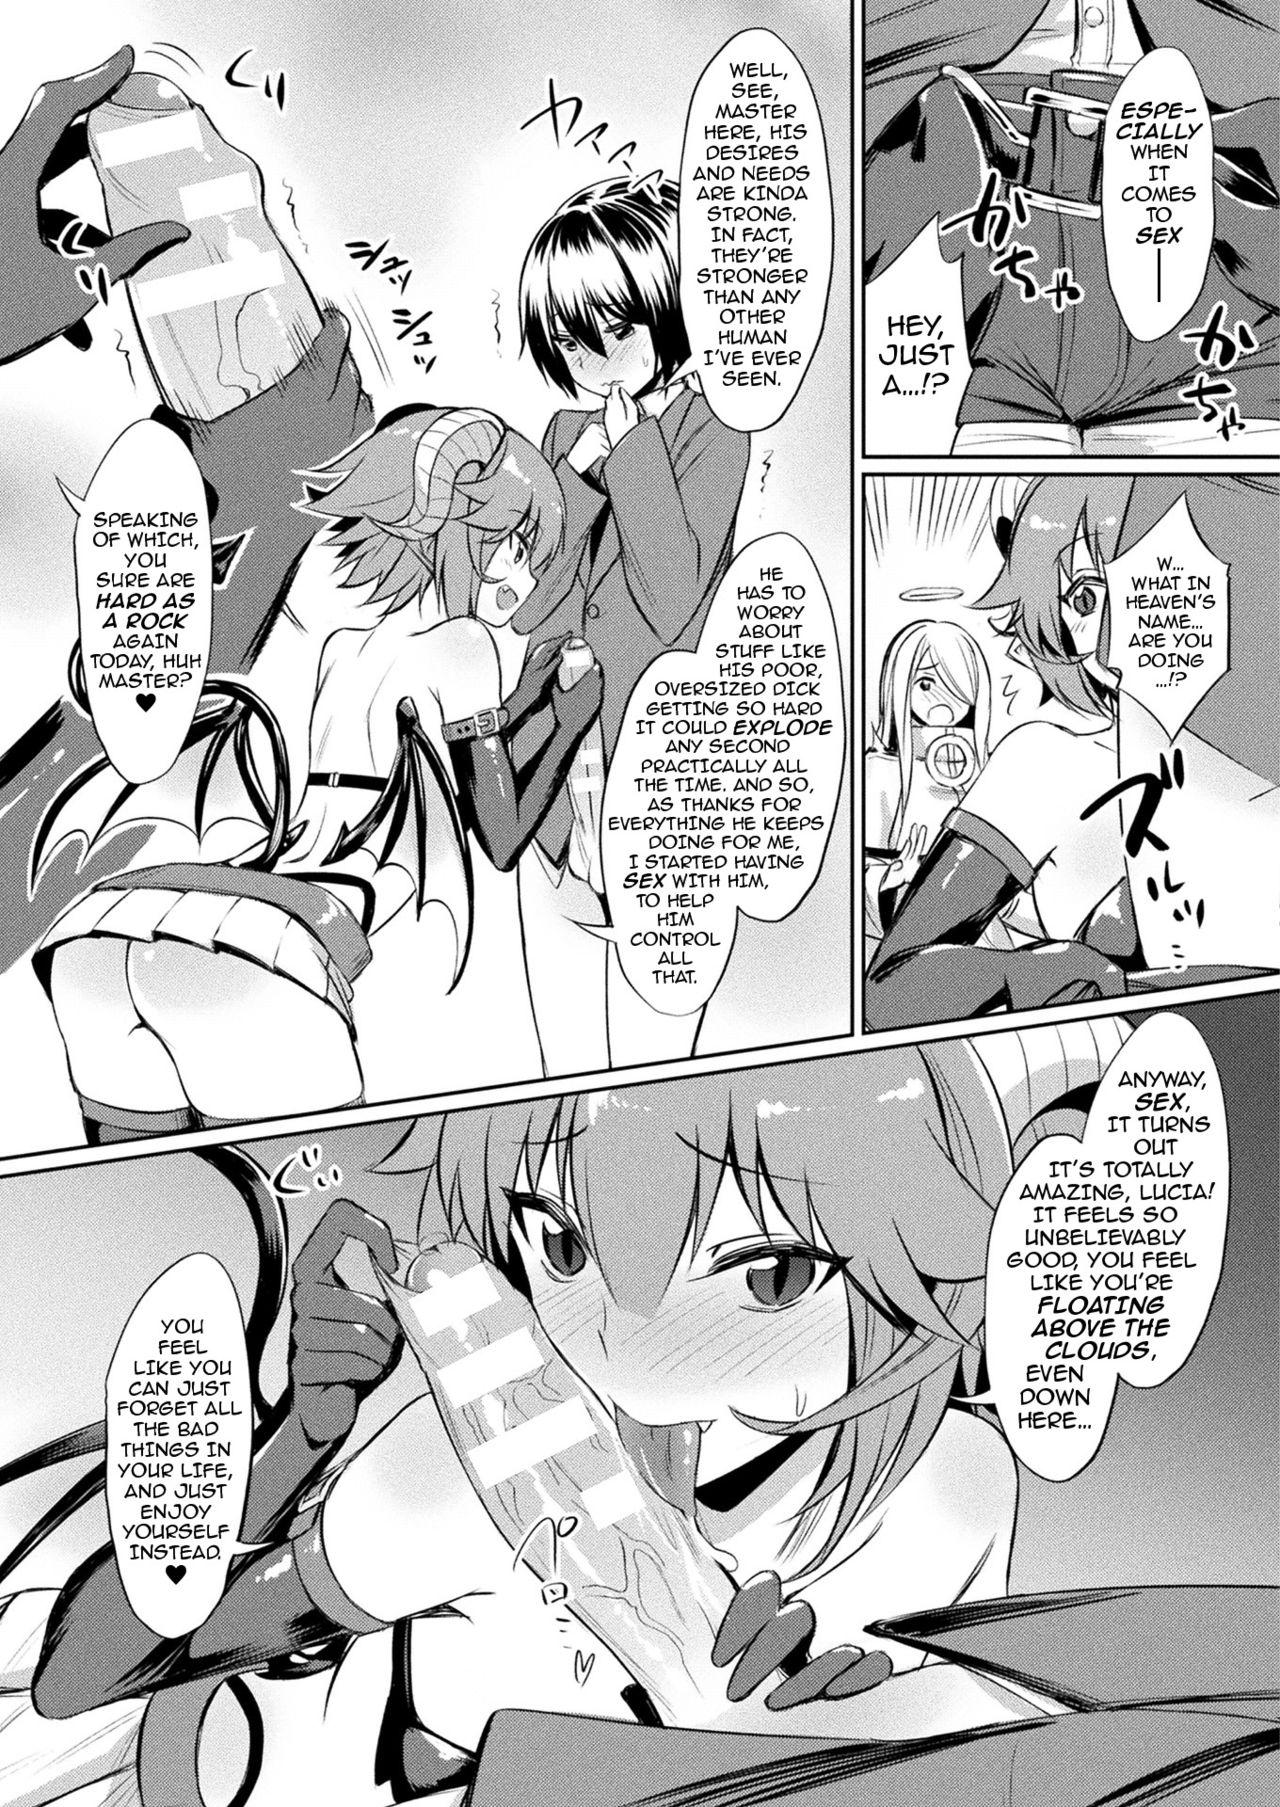 Cumload Kimochii Rakuten Shiyo | Let’s Enjoy the Pleasures of FALLING FROM GRACE Together HD - Page 5